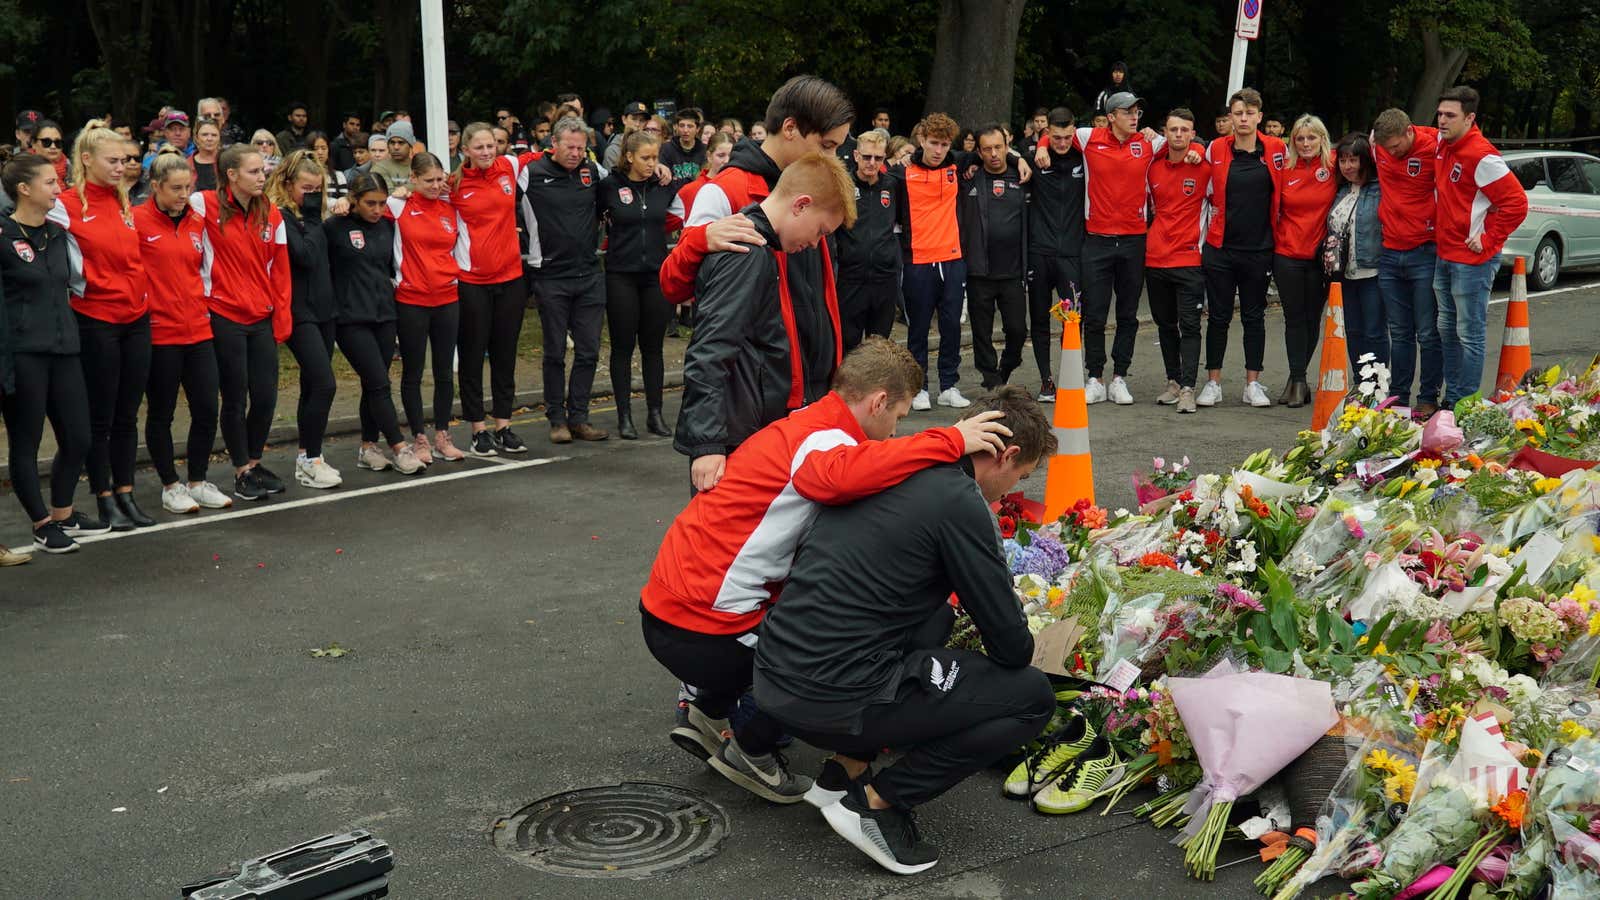 Mourners pay their respects to a victim of the New Zealand shooting.